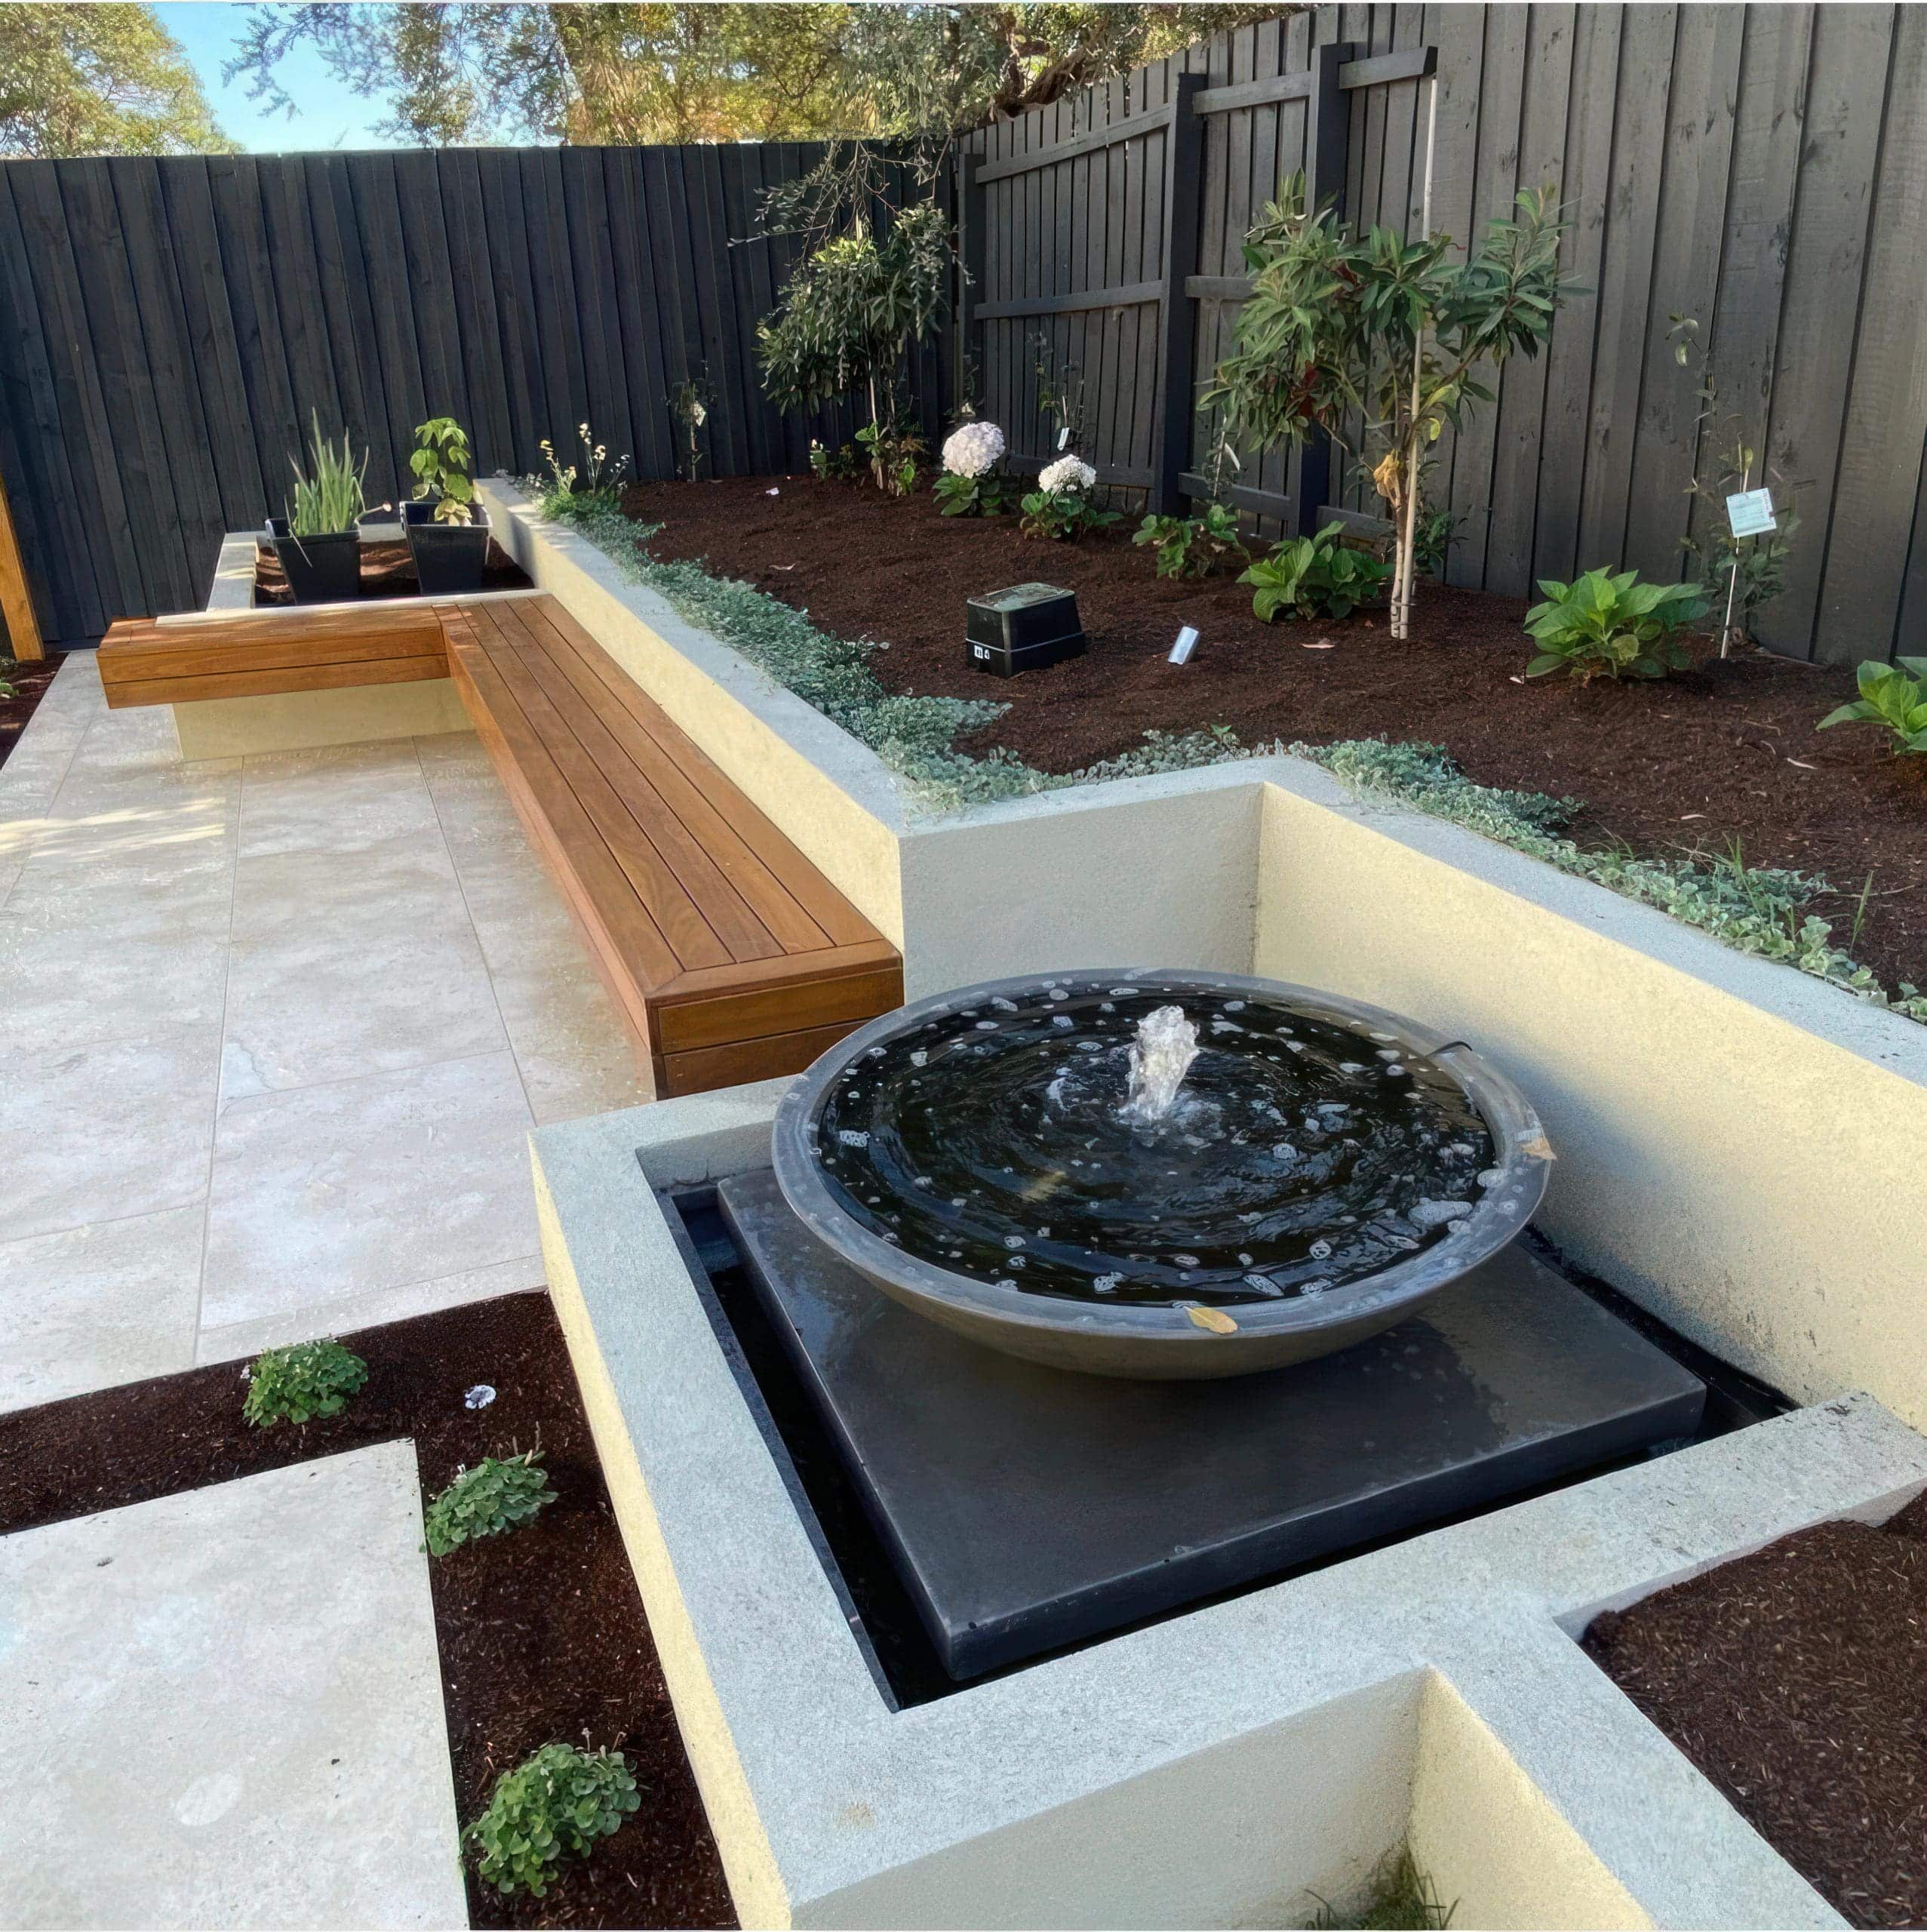 SAVANA LIGHT BRUSHED & TUMBLED LIMESTONE_RMS TRADERS_NATURAL STONE PAVERS POOL COPING AND INTERNAL TILES SUPPLIER MELBOURNE (43)